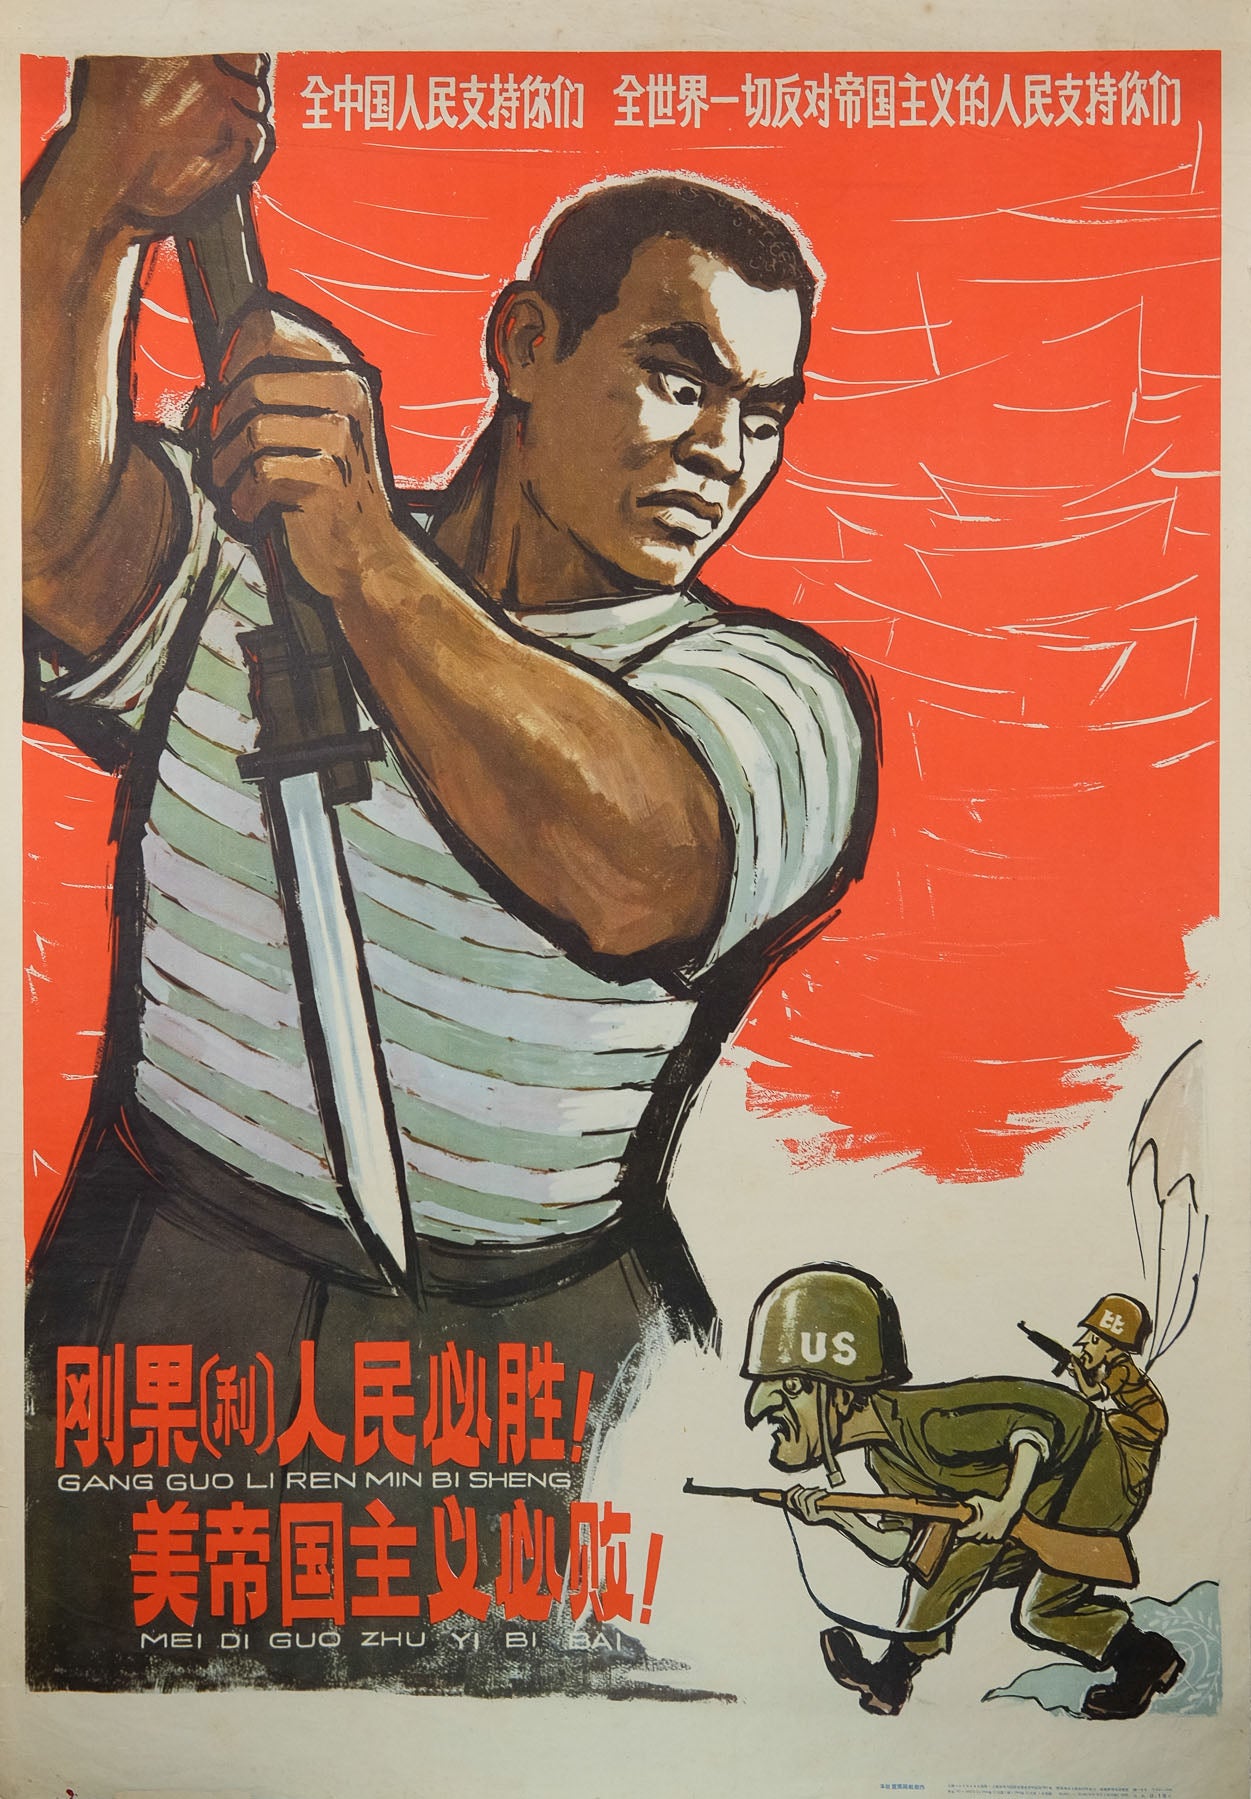 Authentic 1964 Chinese propaganda poster The people of the Congo must be victorious! American imperialism must be defeated! 